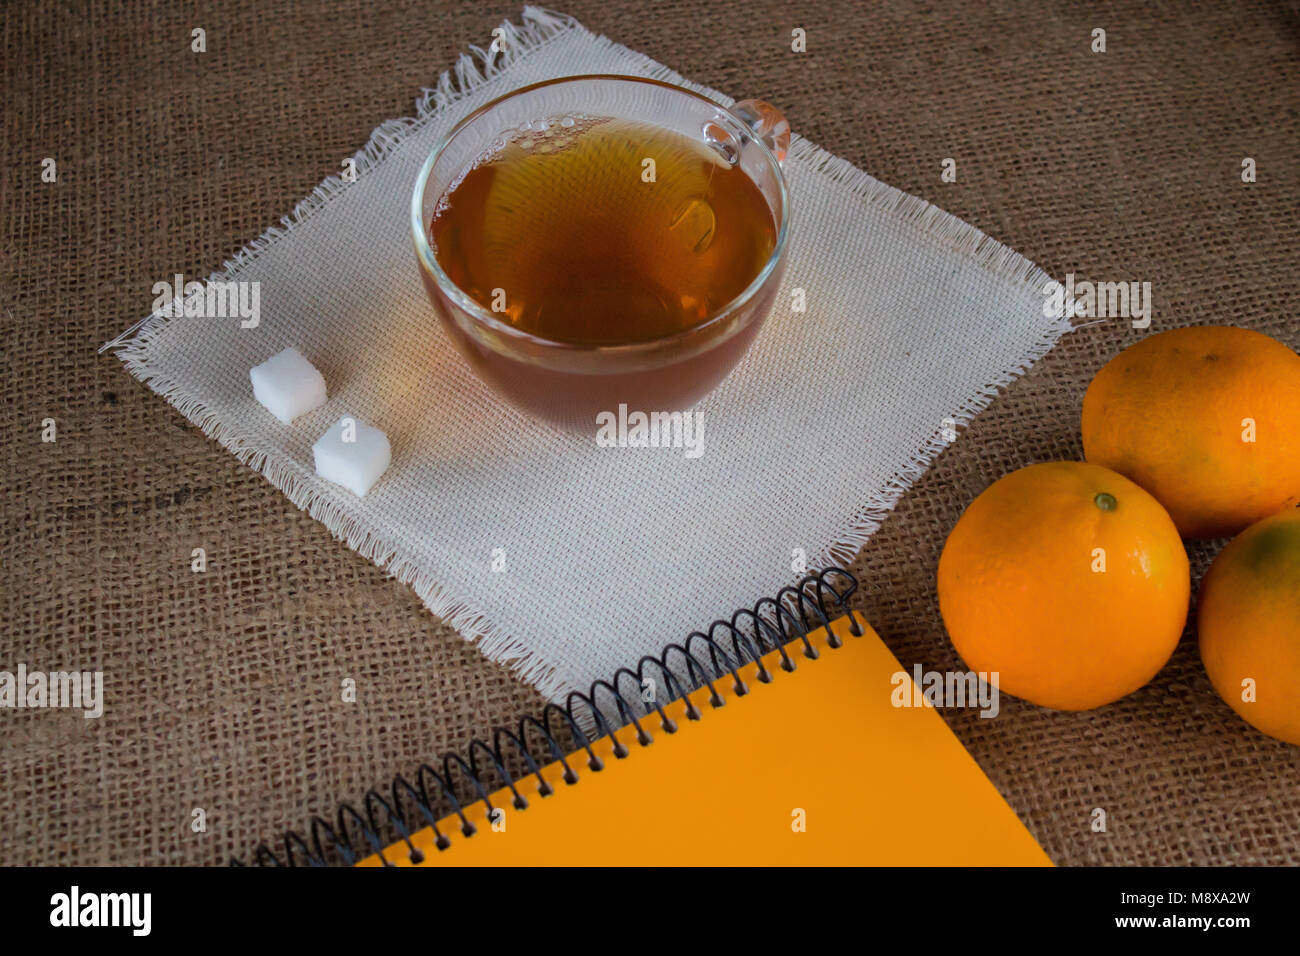 Morning cup of tea. Mandarins on the table. Notepad to write plans for the day. Stock Photo